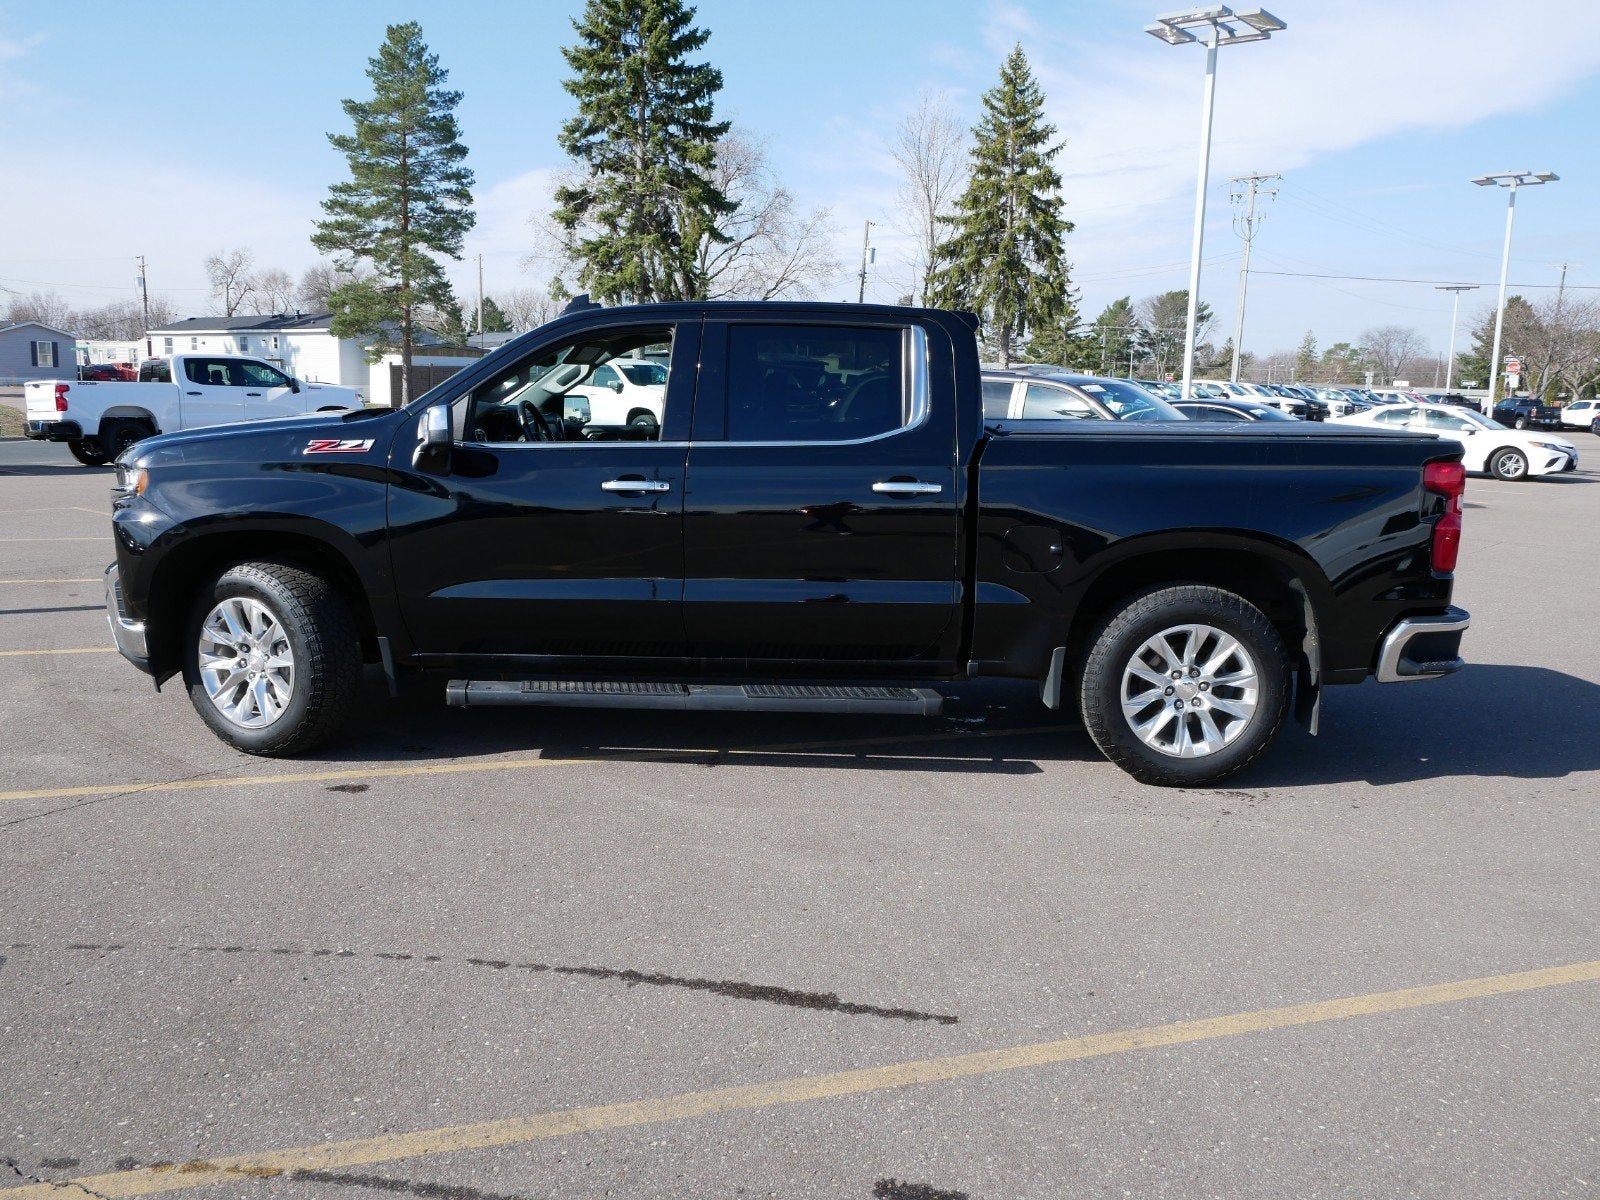 Used 2019 Chevrolet Silverado 1500 LTZ with VIN 1GCUYGED8KZ422787 for sale in Fridley, Minnesota